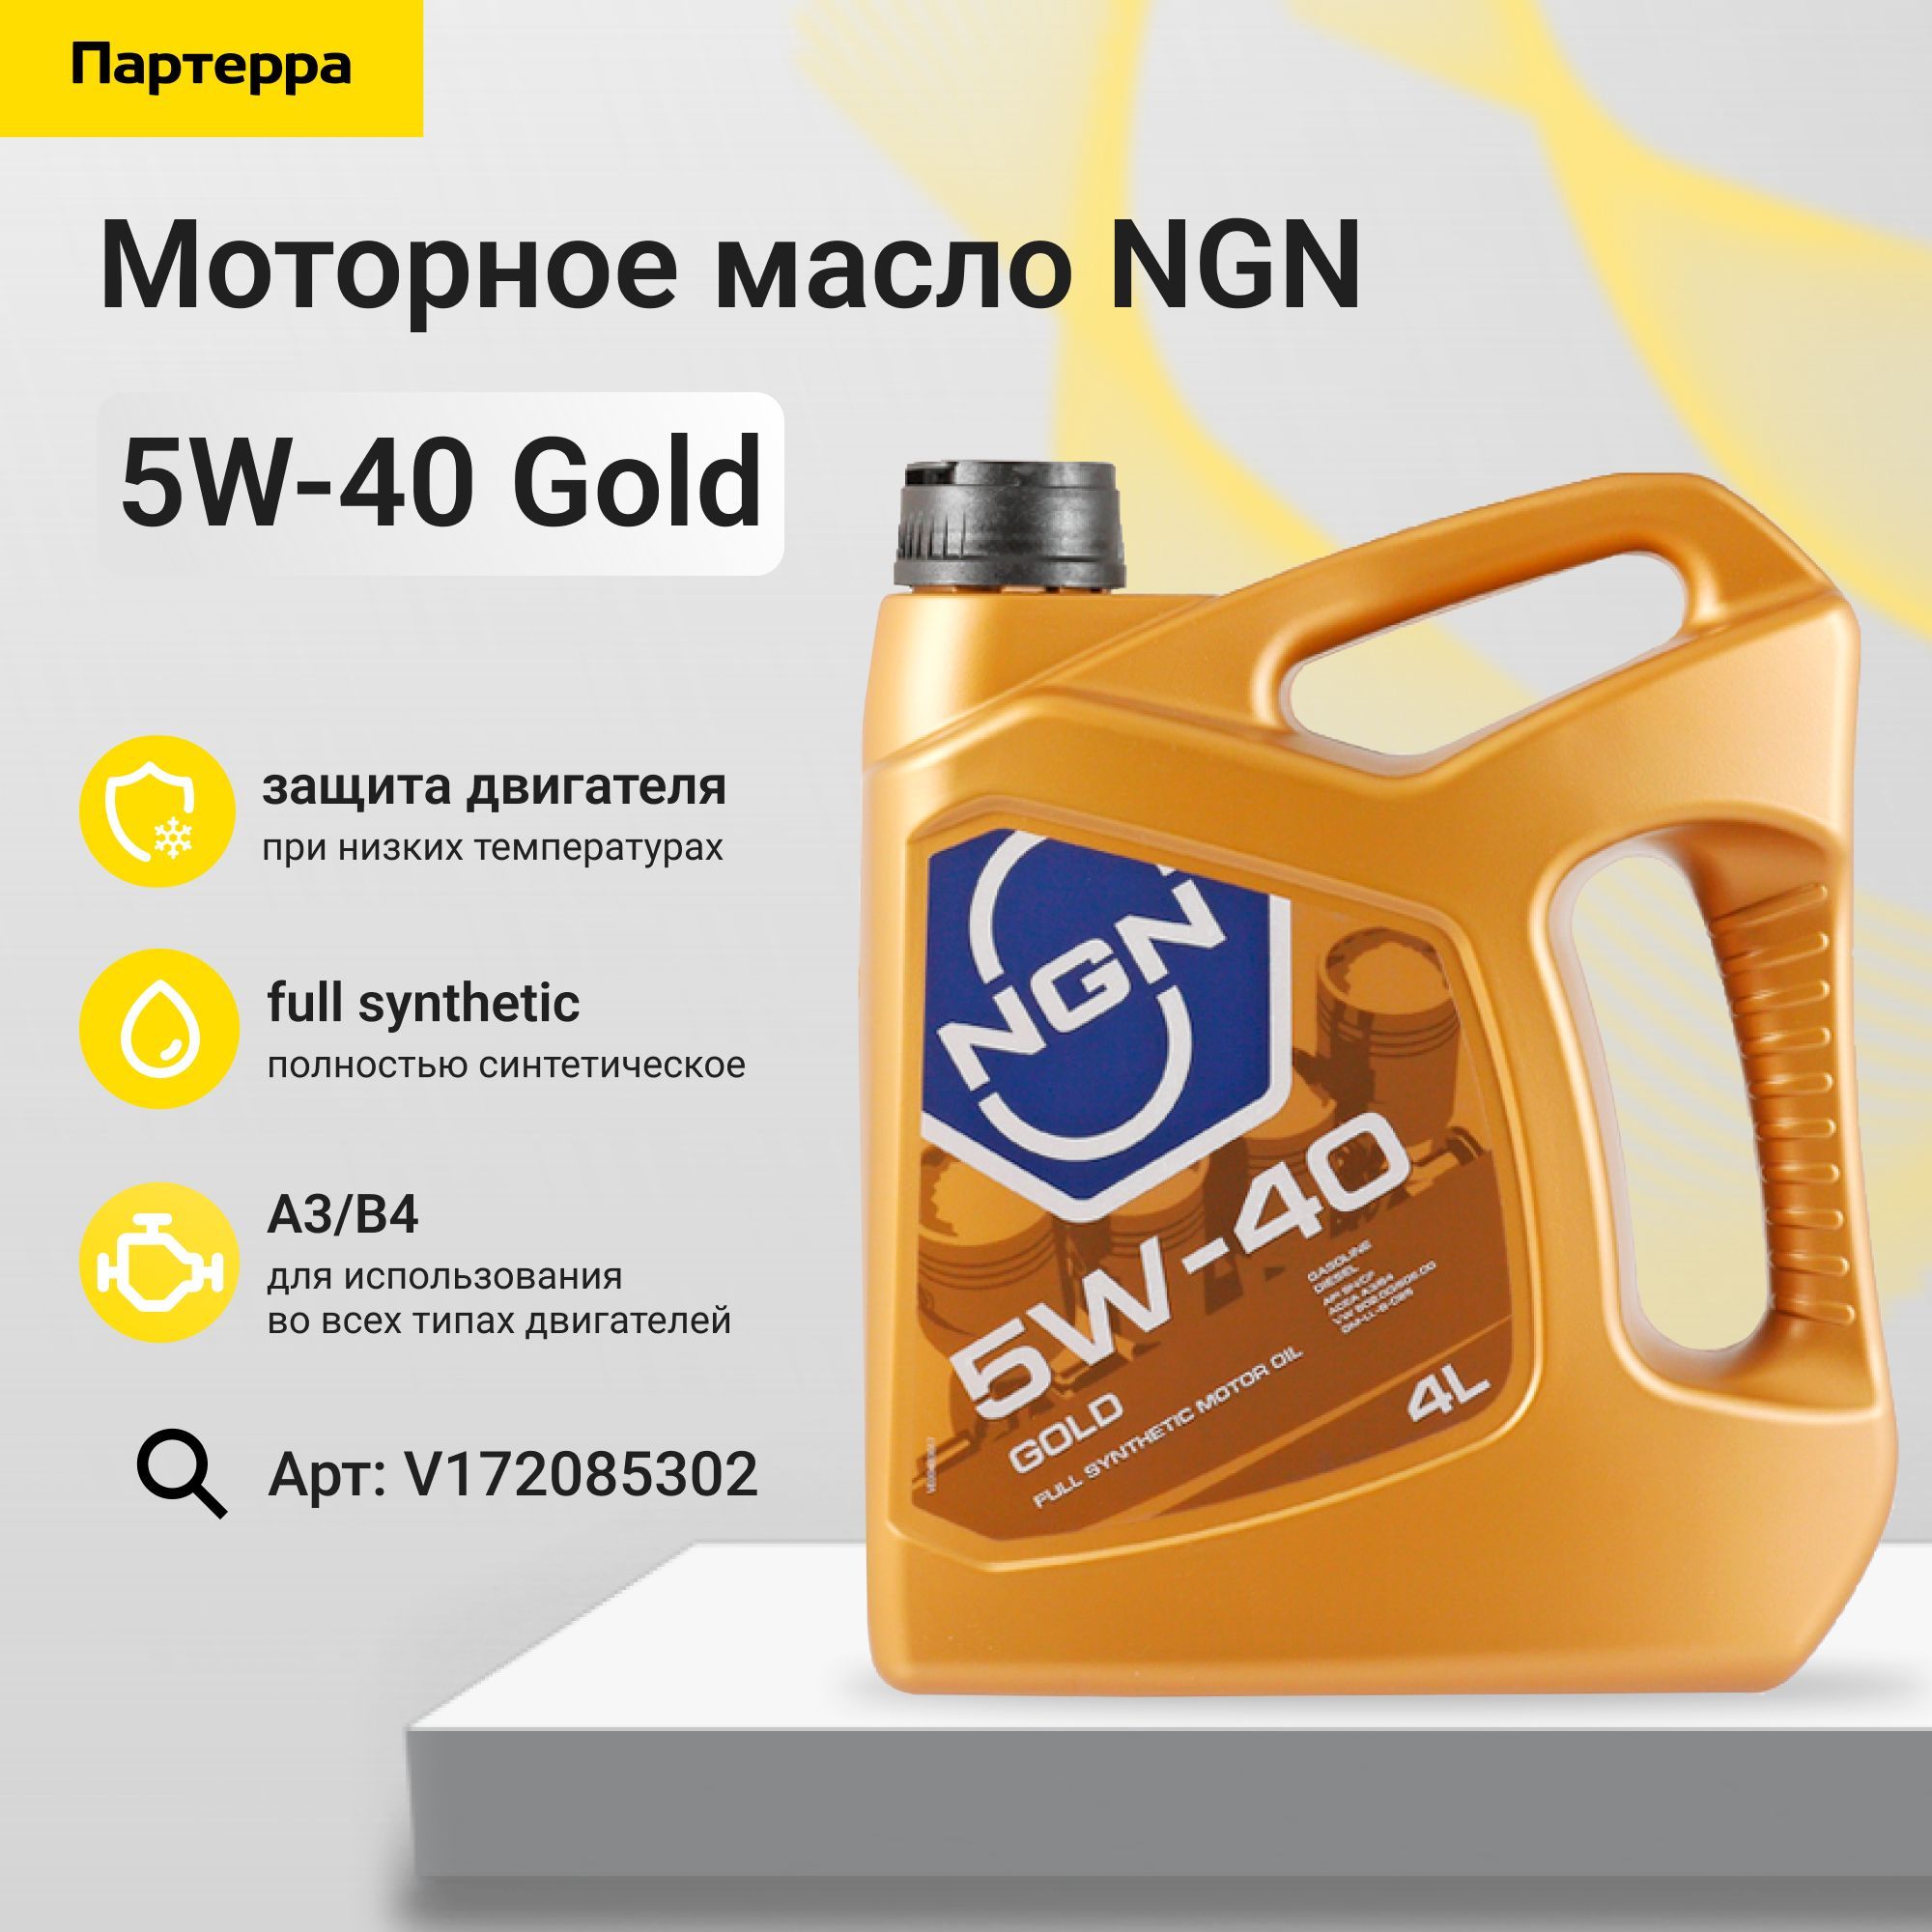 Масло ngn 5w 40. NGN 5w40. Моторное масло NGN 5w40. Масло NGN 5 40. Vfckj vjnjhyjt Eng.